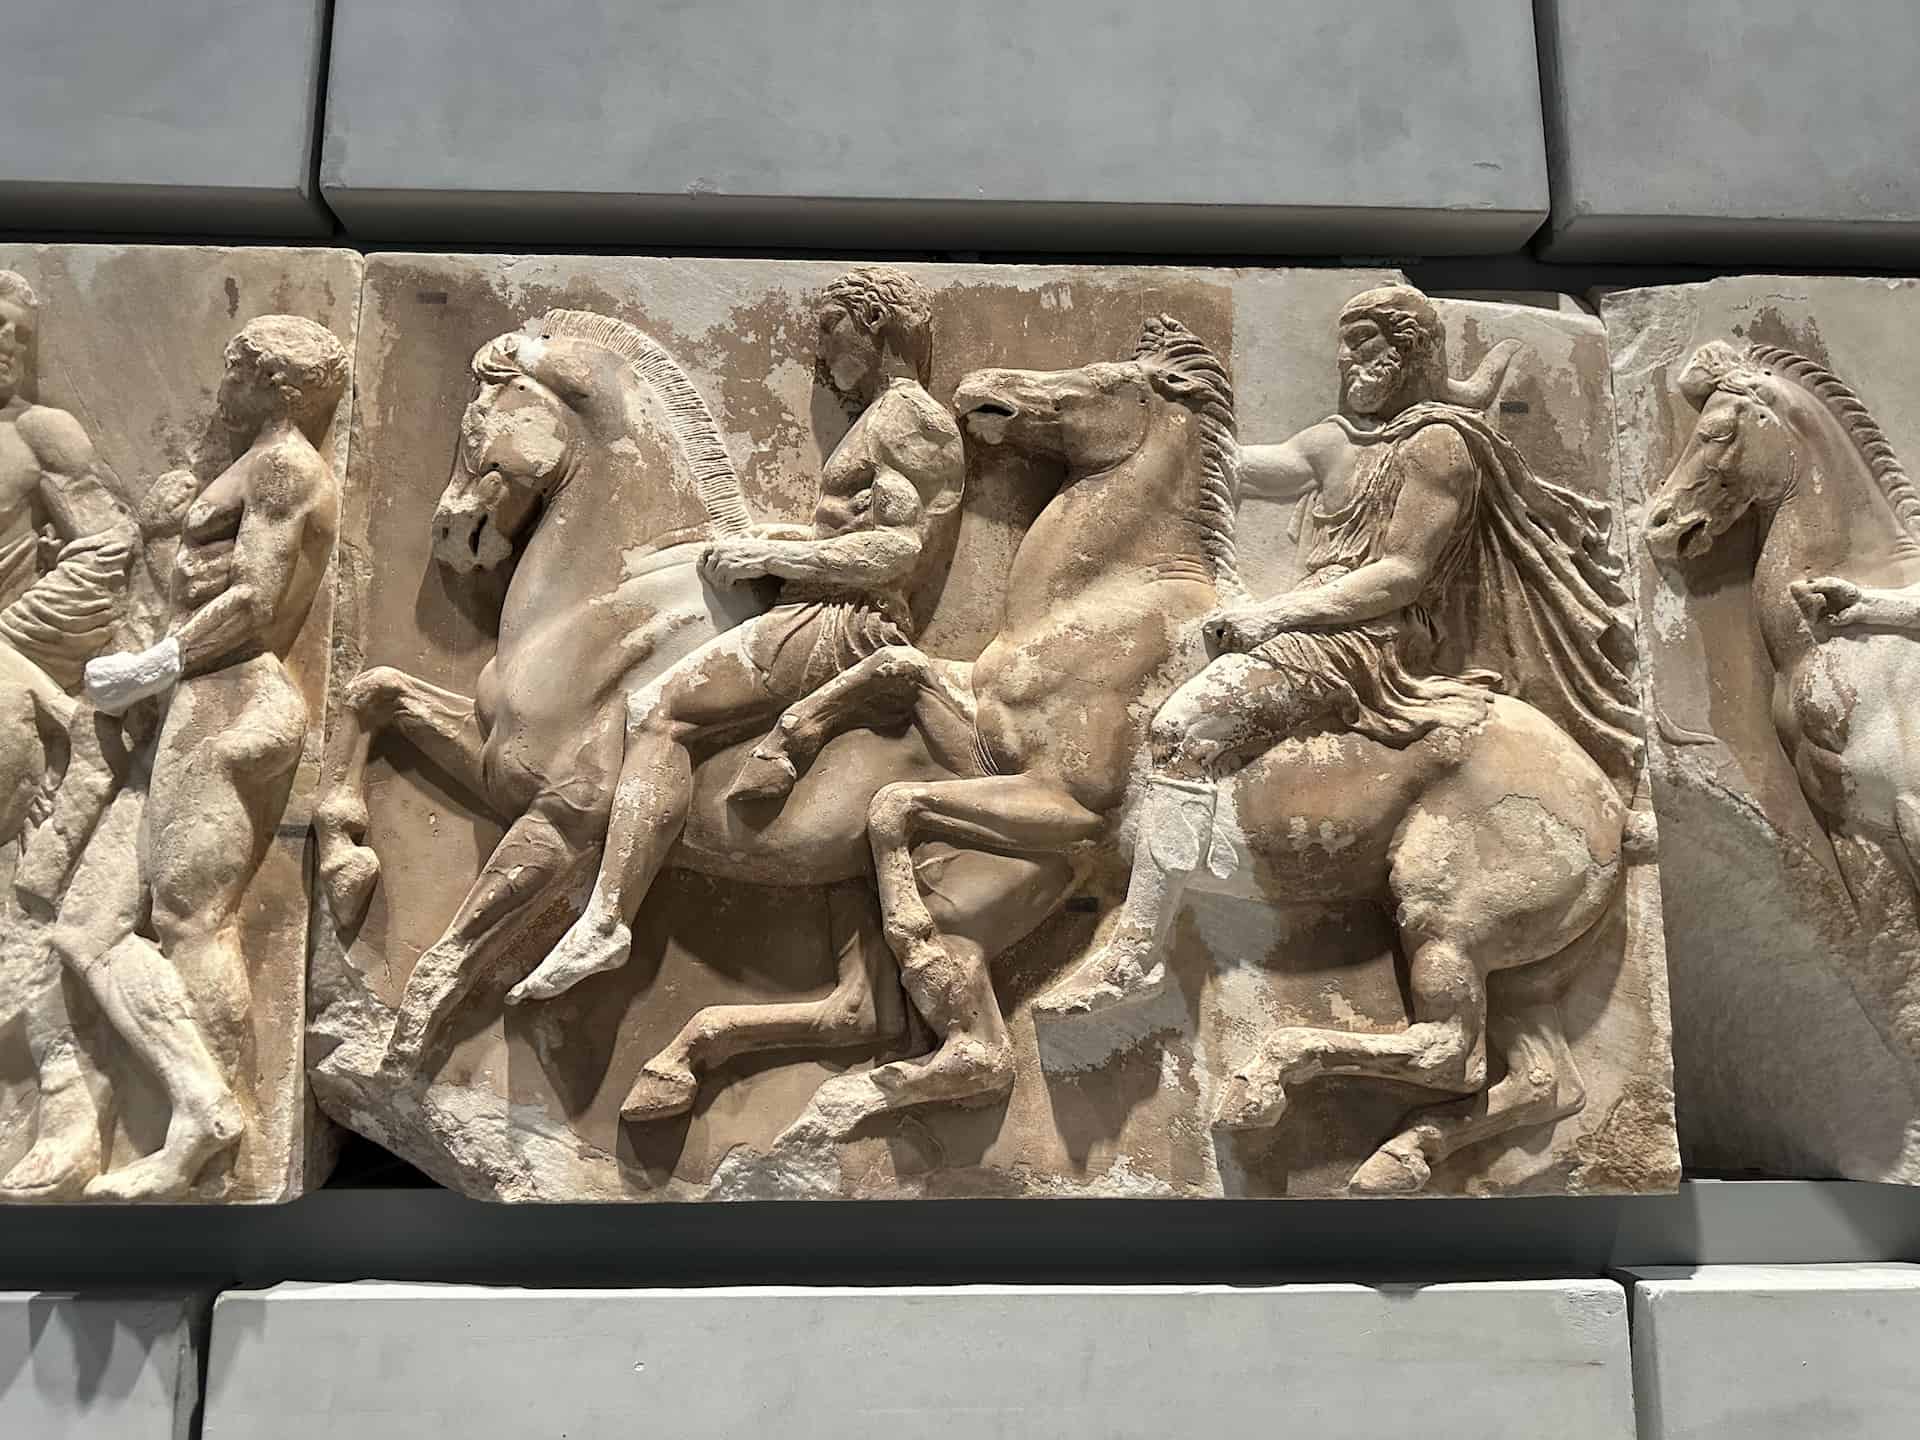 W IV, 7-8 on the west frieze of the Parthenon